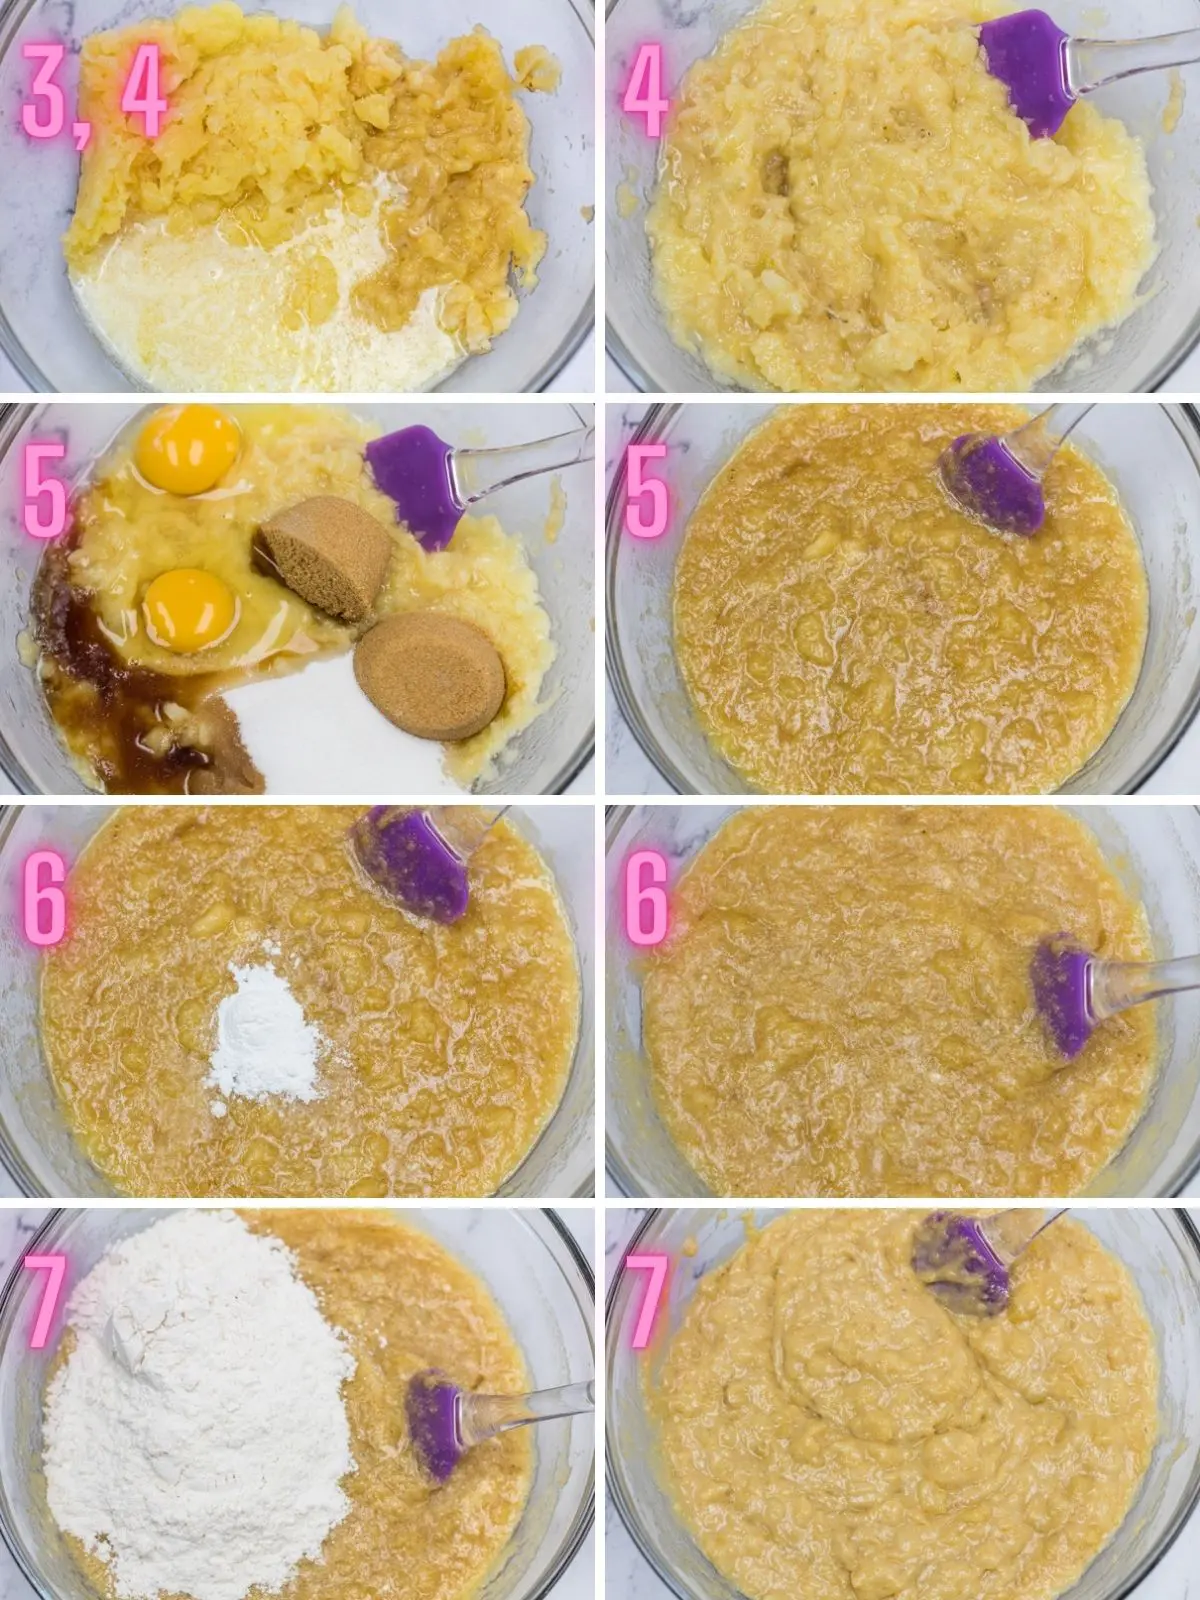 8 step by step process photos of mixing the batter.